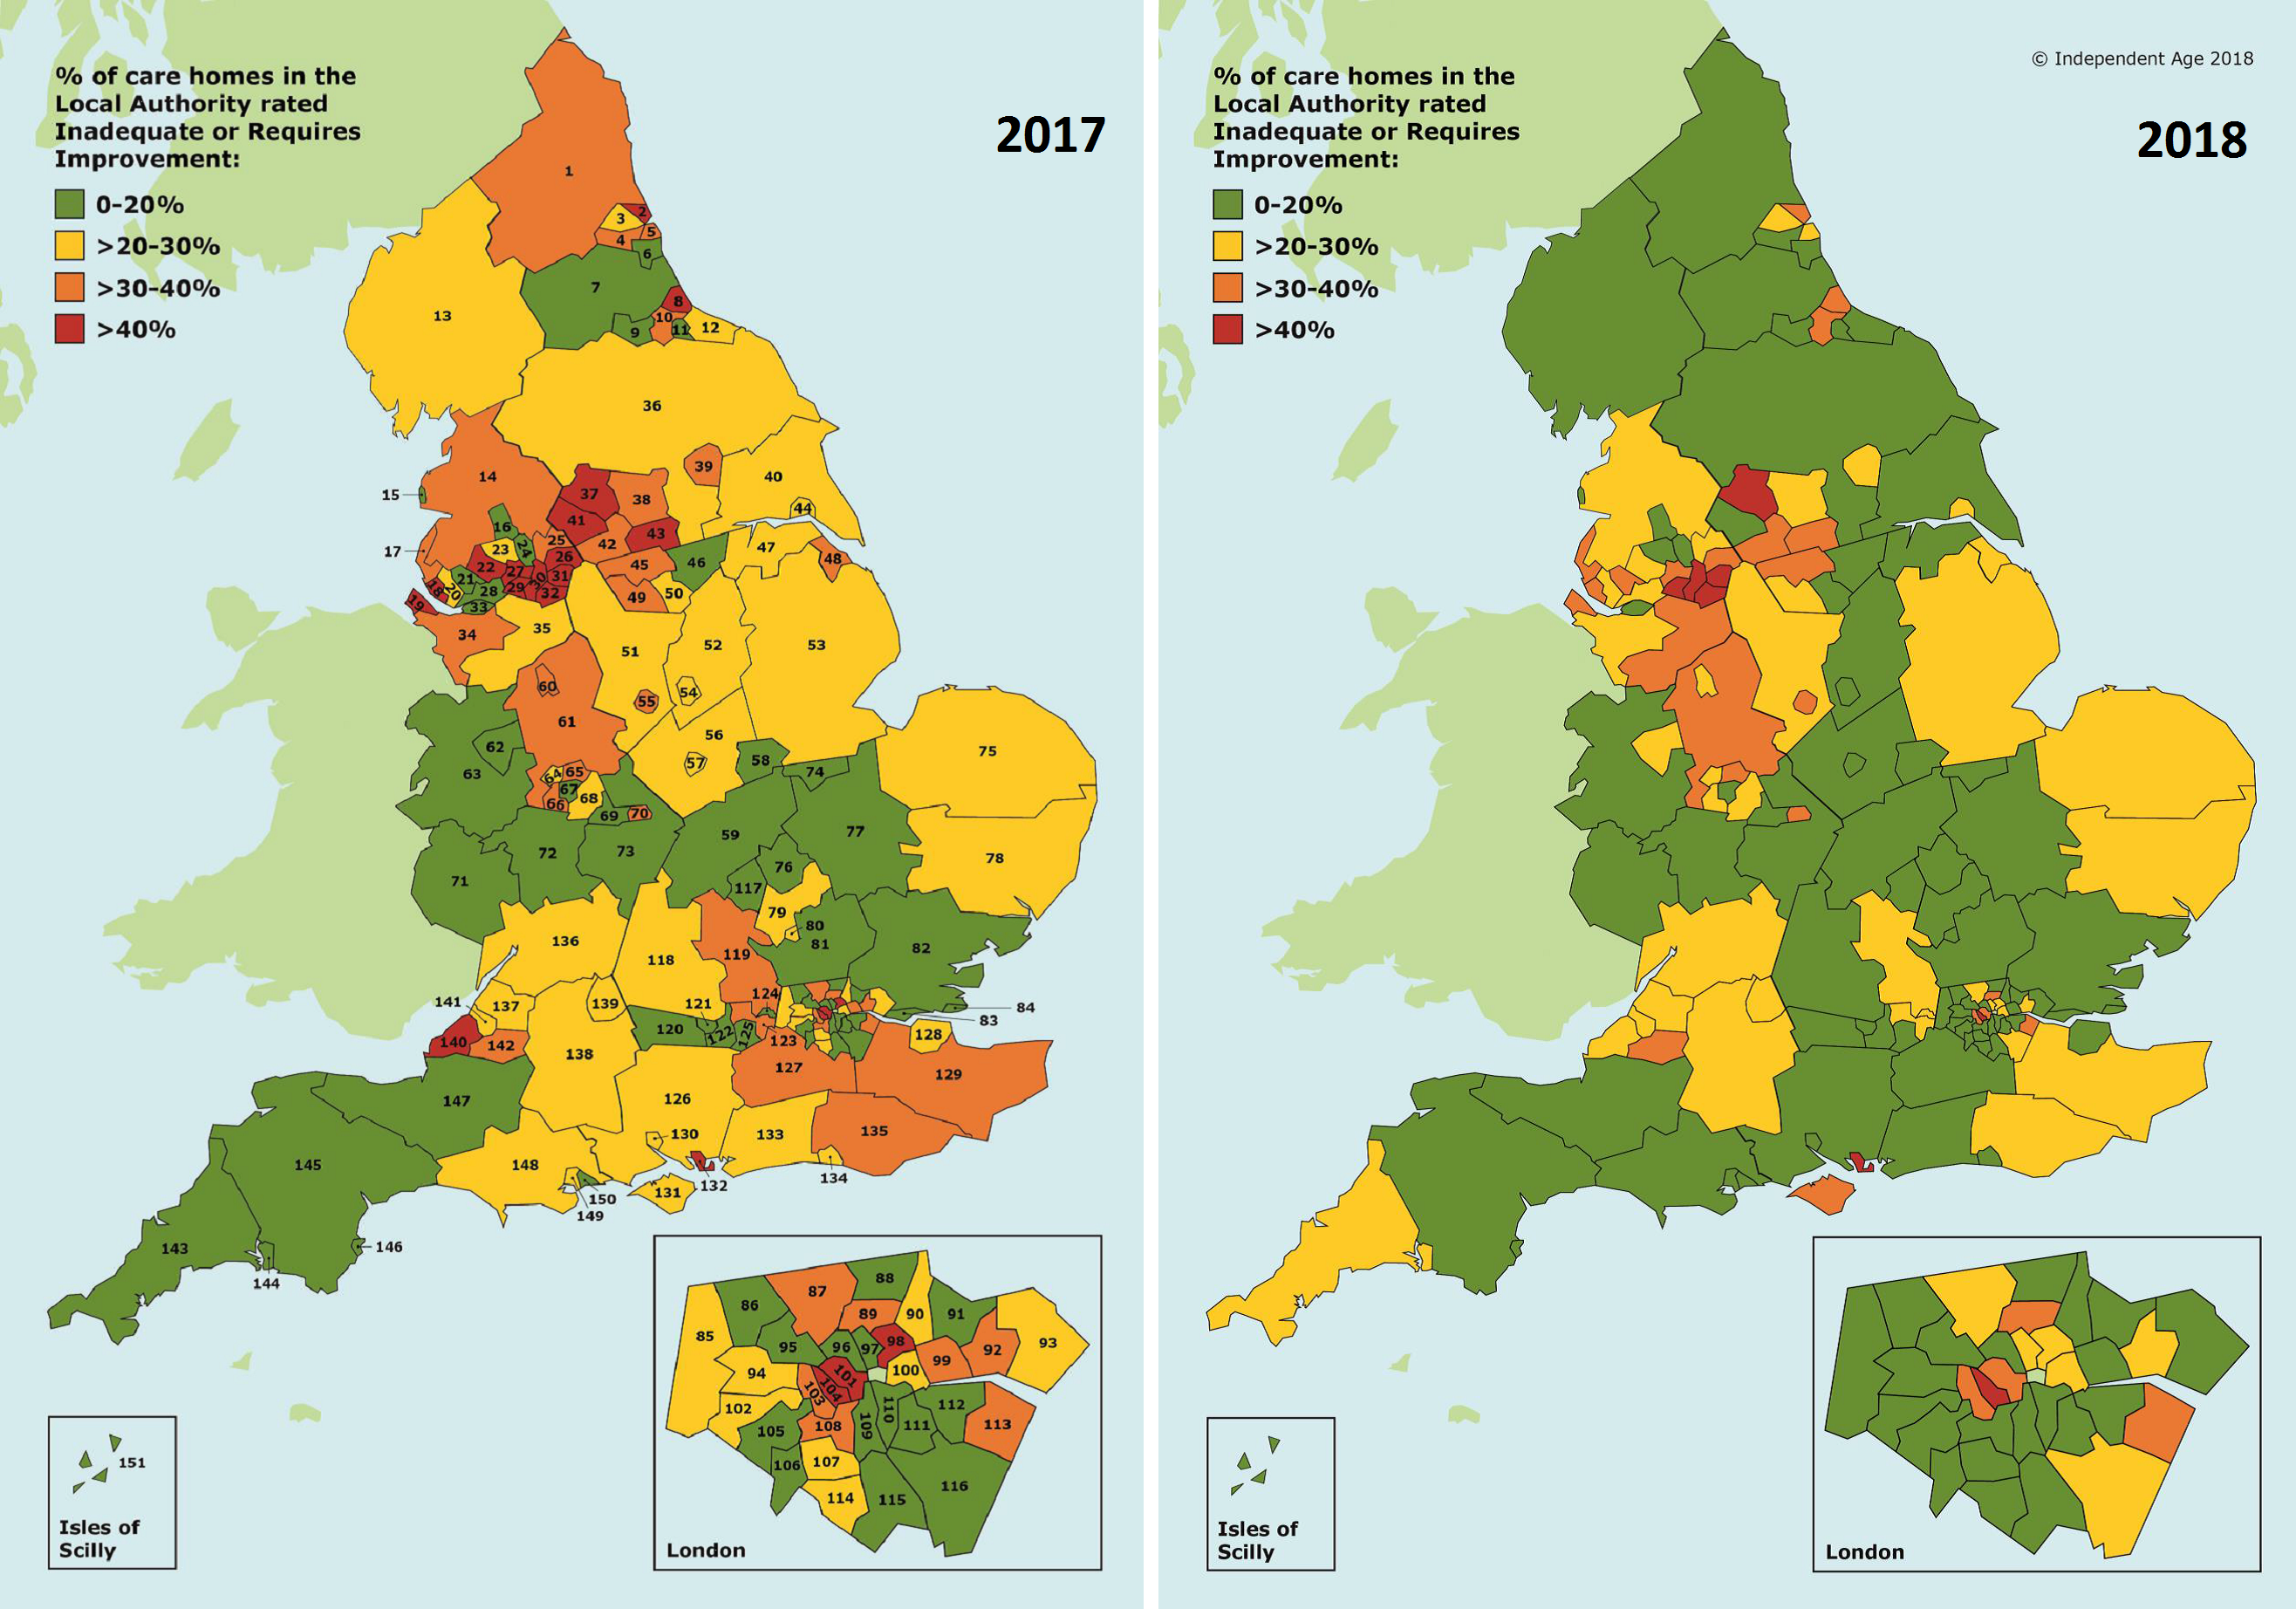 Maps comparing care home performance in England in 2017 and 2018